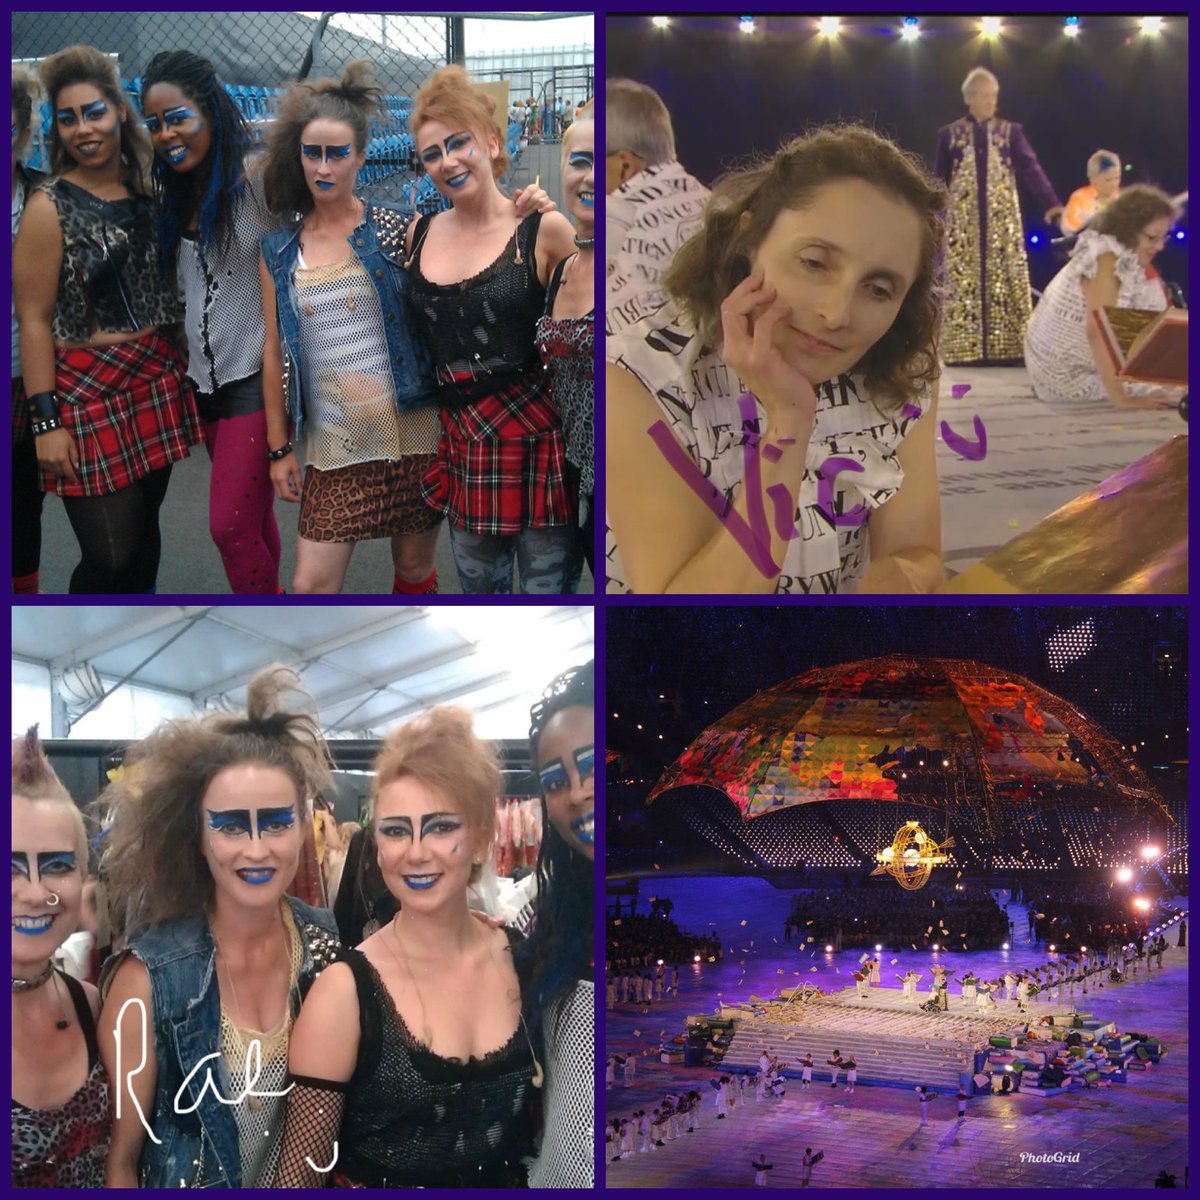 Pakiki Co-Directors Vickie & Raewyn looked out photos from their time in #London2012 #Olympic  and #paralympics ceremonies! One of the inspirations behind creating our interactive family show 'Who Wants to be an Olympian' which will be on tour this summer to celebrate #paris2024